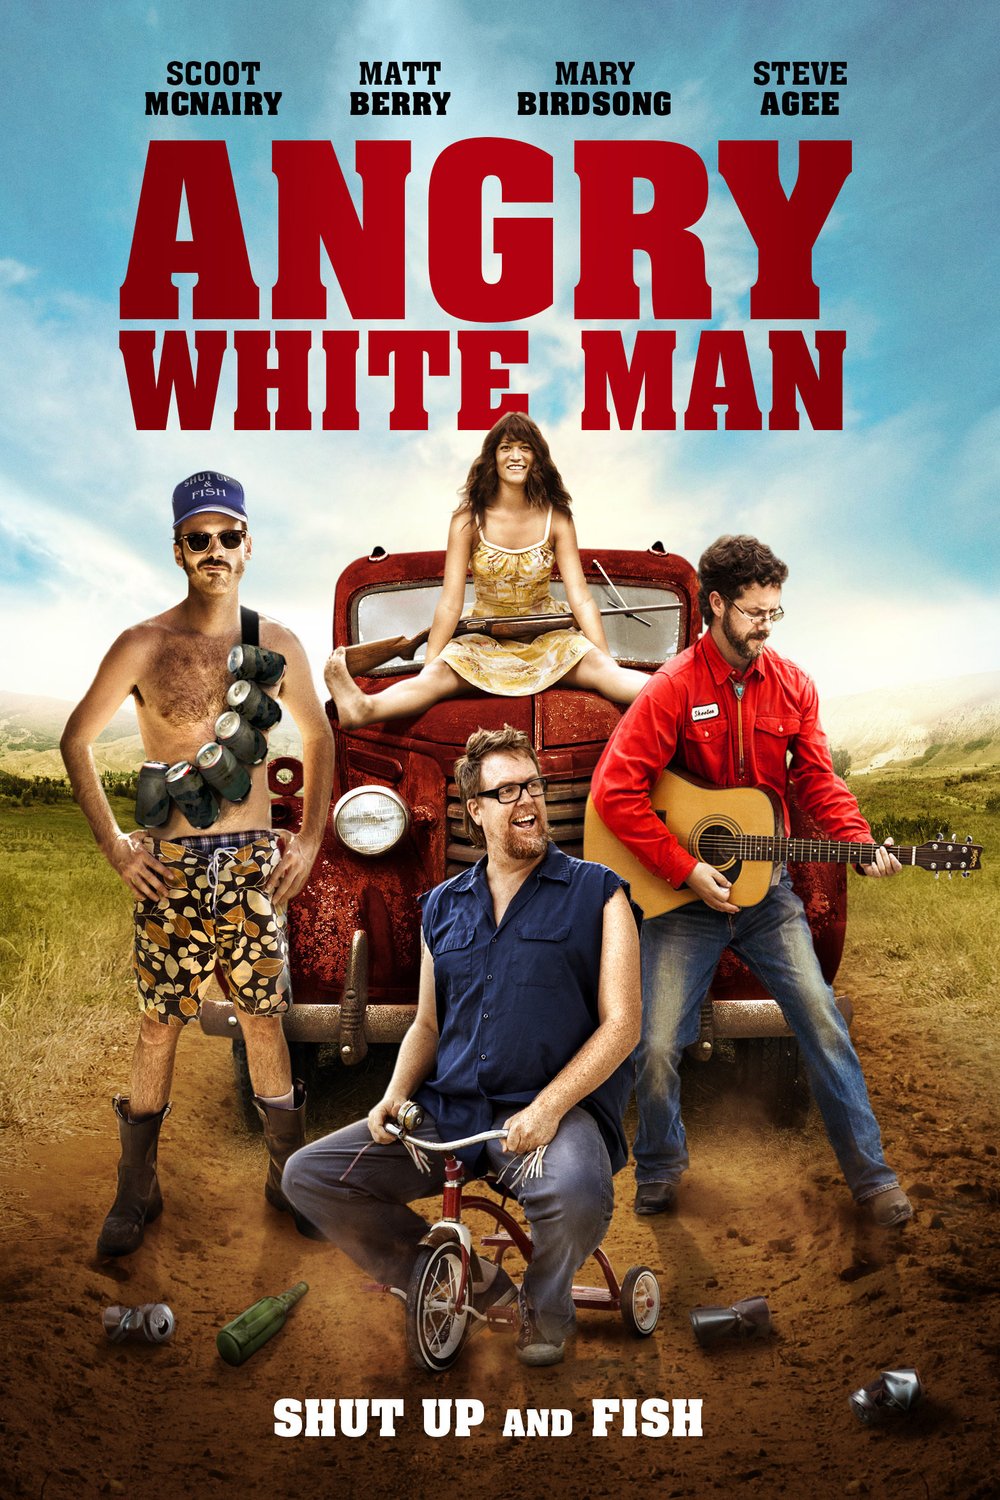 Poster of the movie Angry White Man